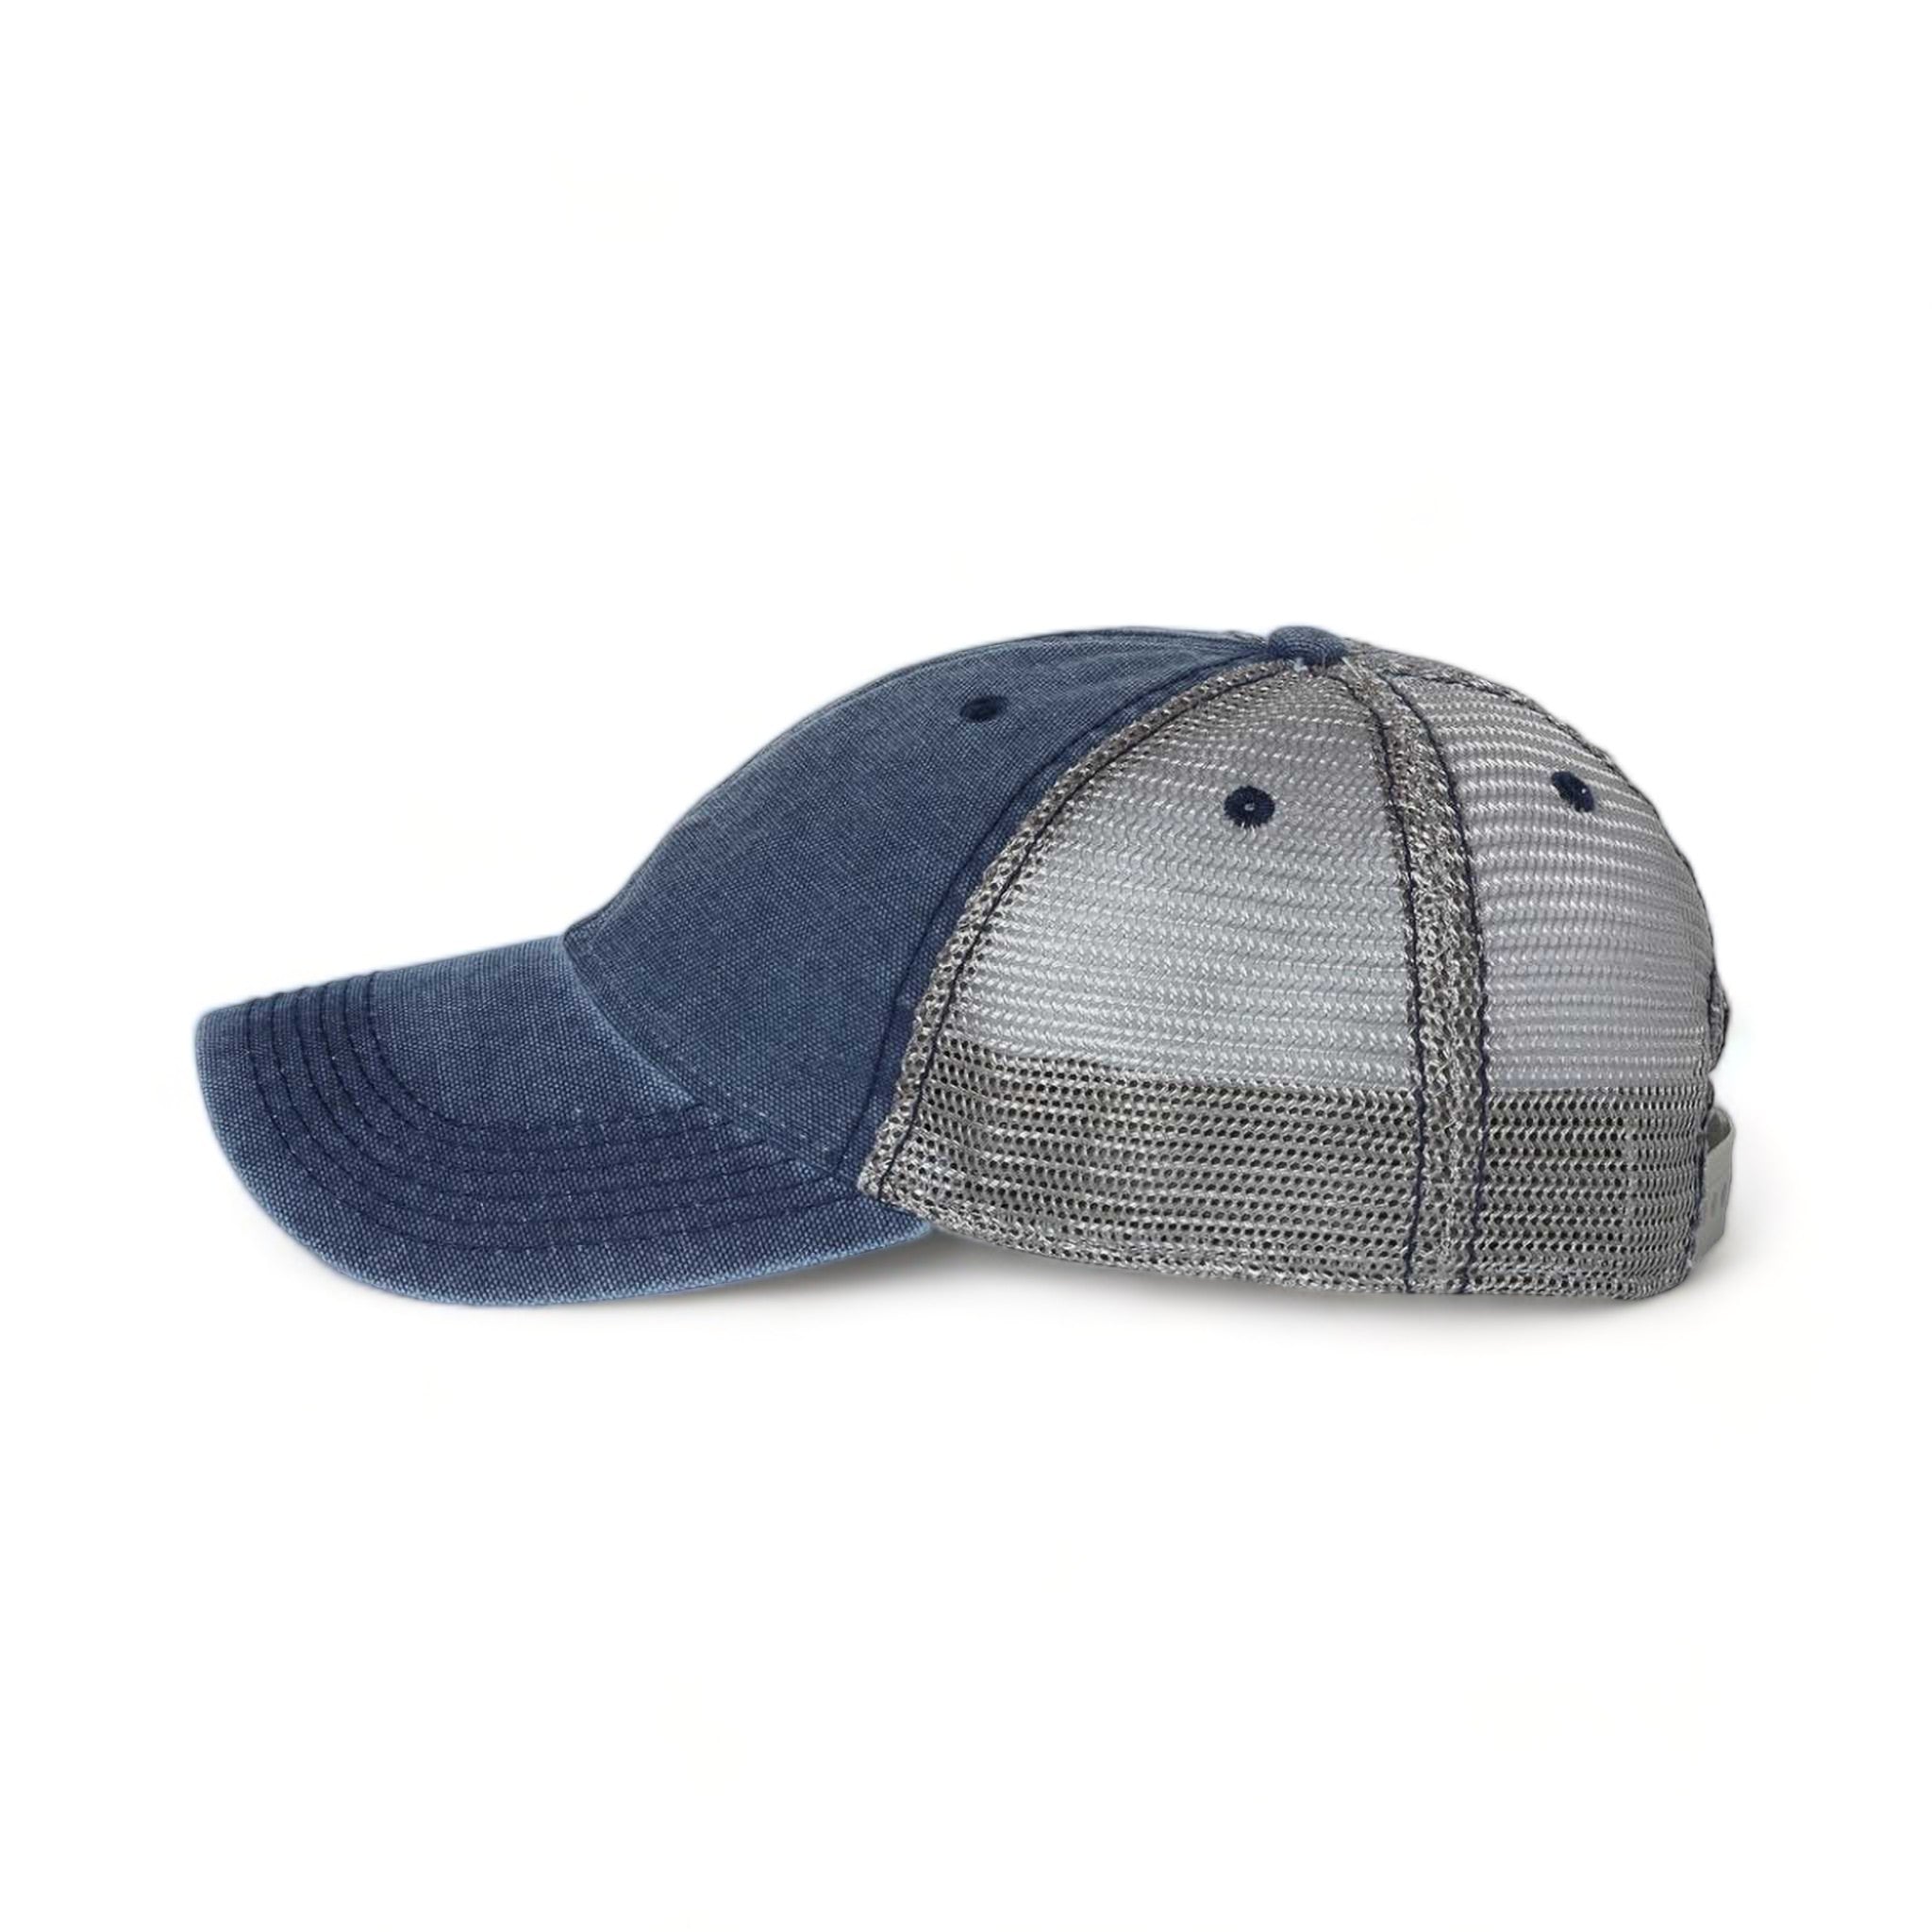 Side view of LEGACY DTA custom hat in navy and grey